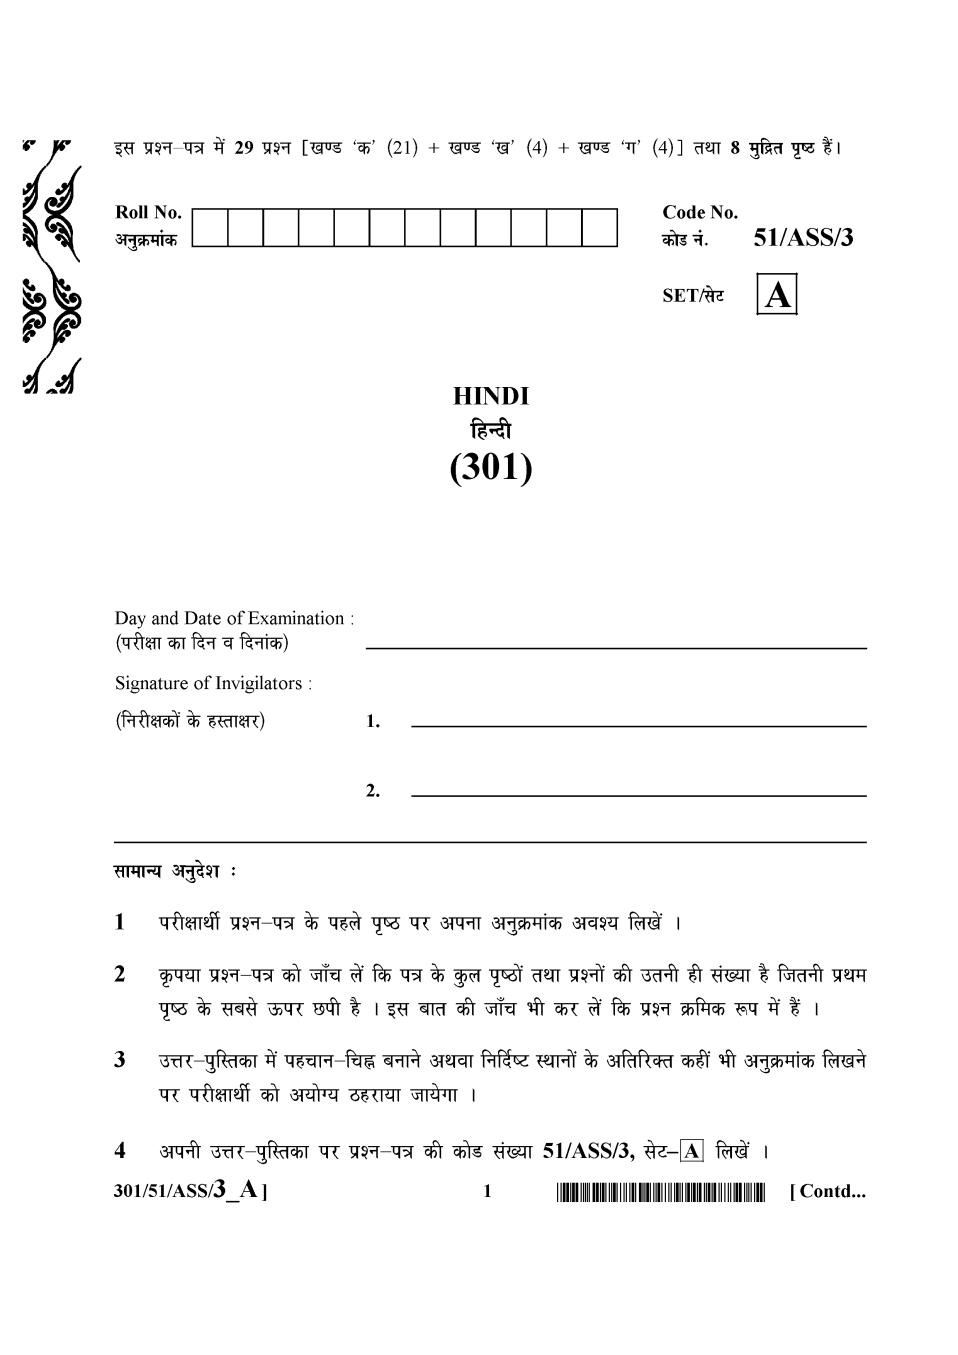 NIOS Class 12 Question Paper Oct 2015 - Hindi - Page 1